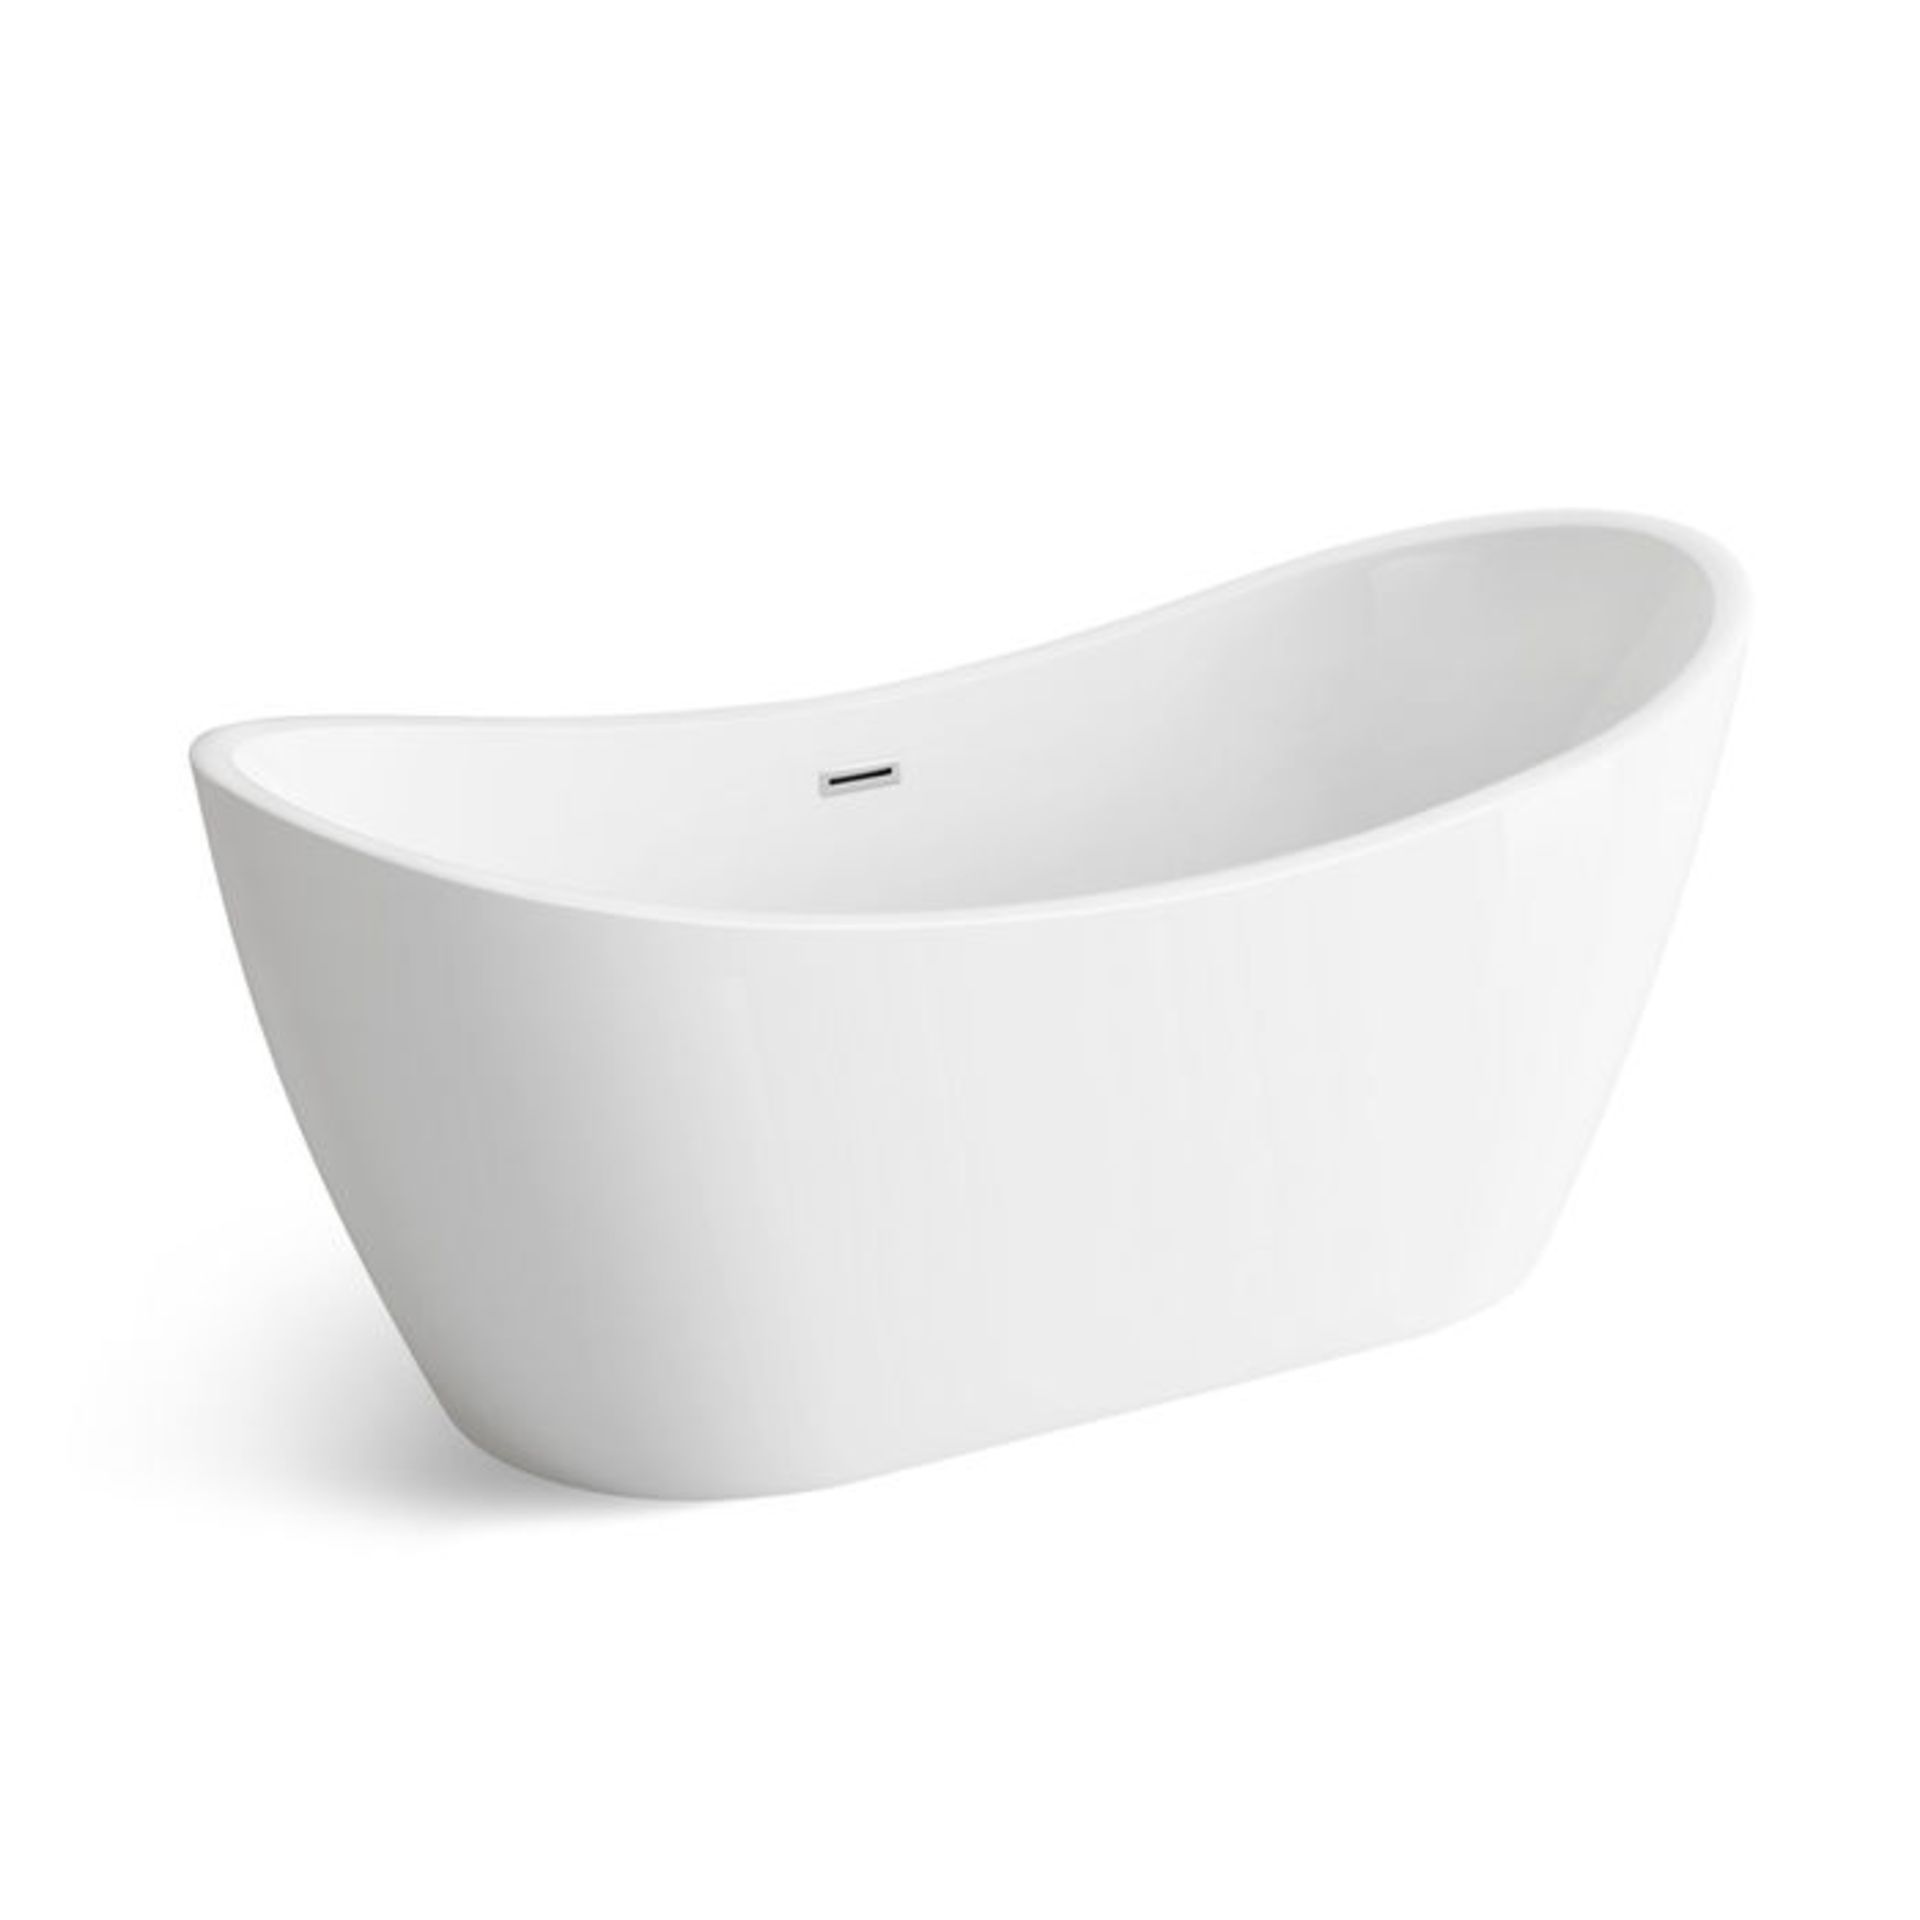 New (E2) 1700mm x 780mm Caitlyn Freestanding Bath. Visually Simplistic To Suit Any Bathroom Inter... - Image 3 of 3